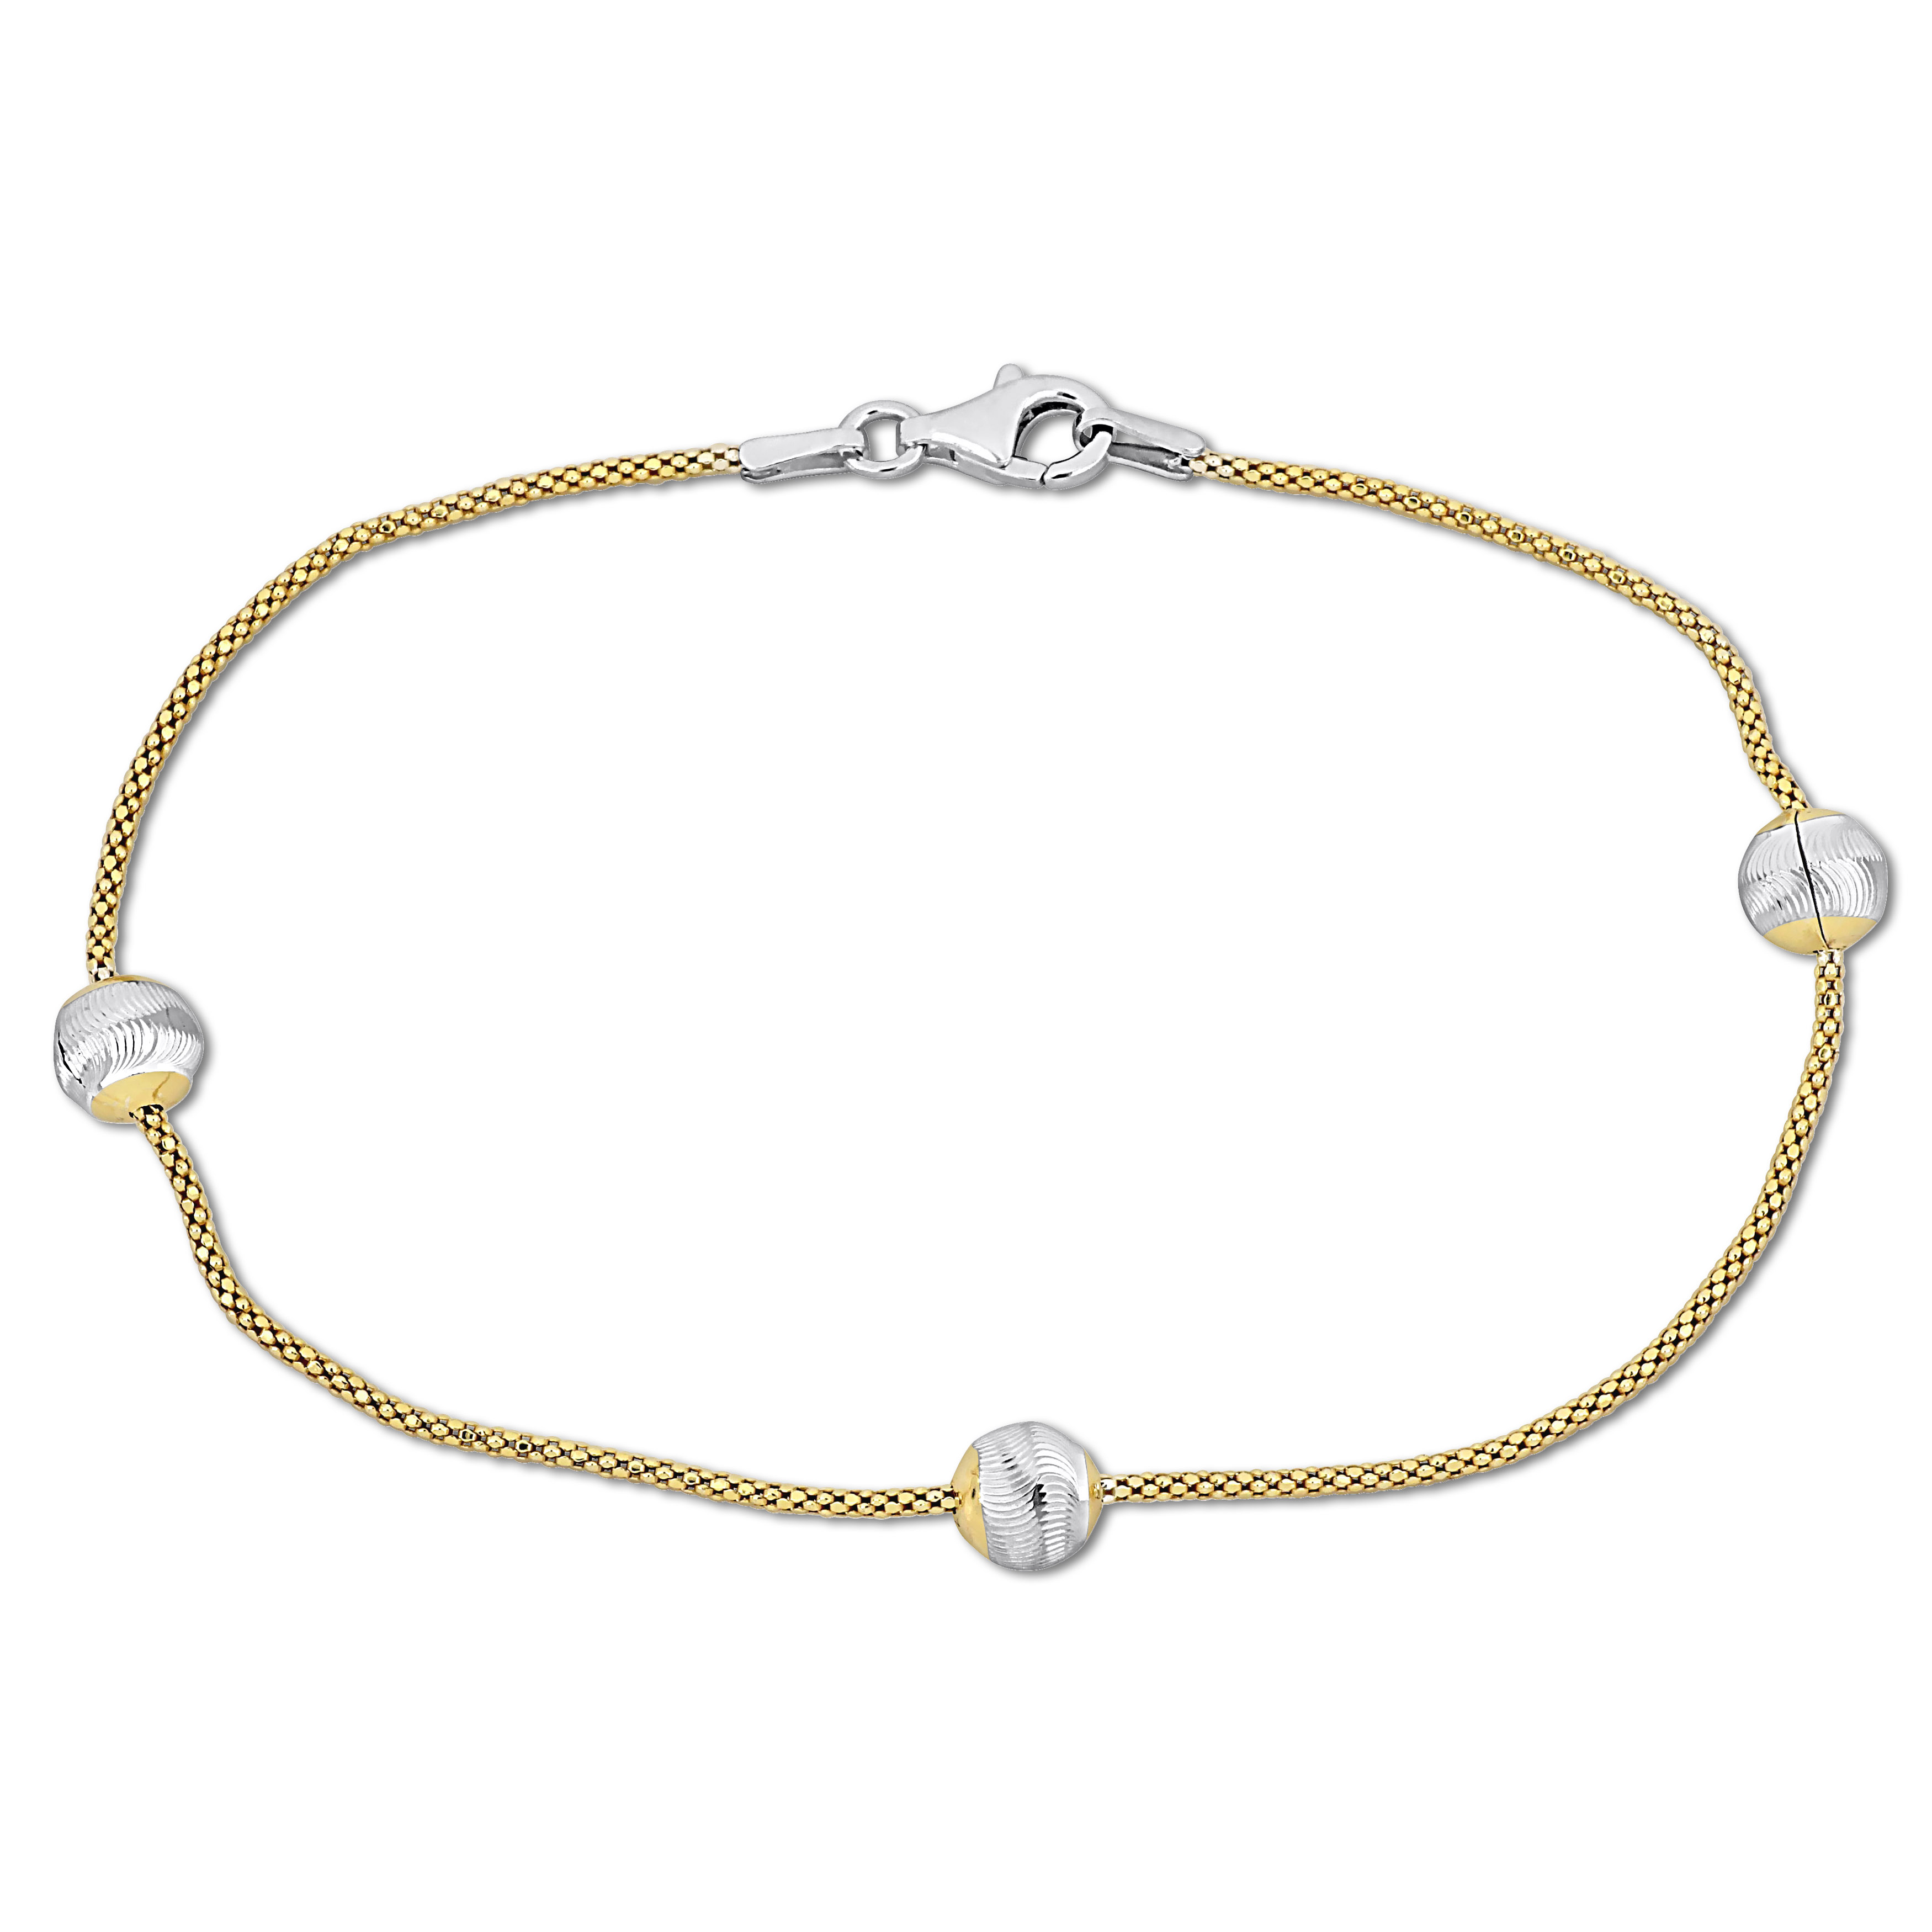 6mm Ball Station Chain Bracelet in Two-Tone Yellow and White Sterling Silver - 7.5 in.